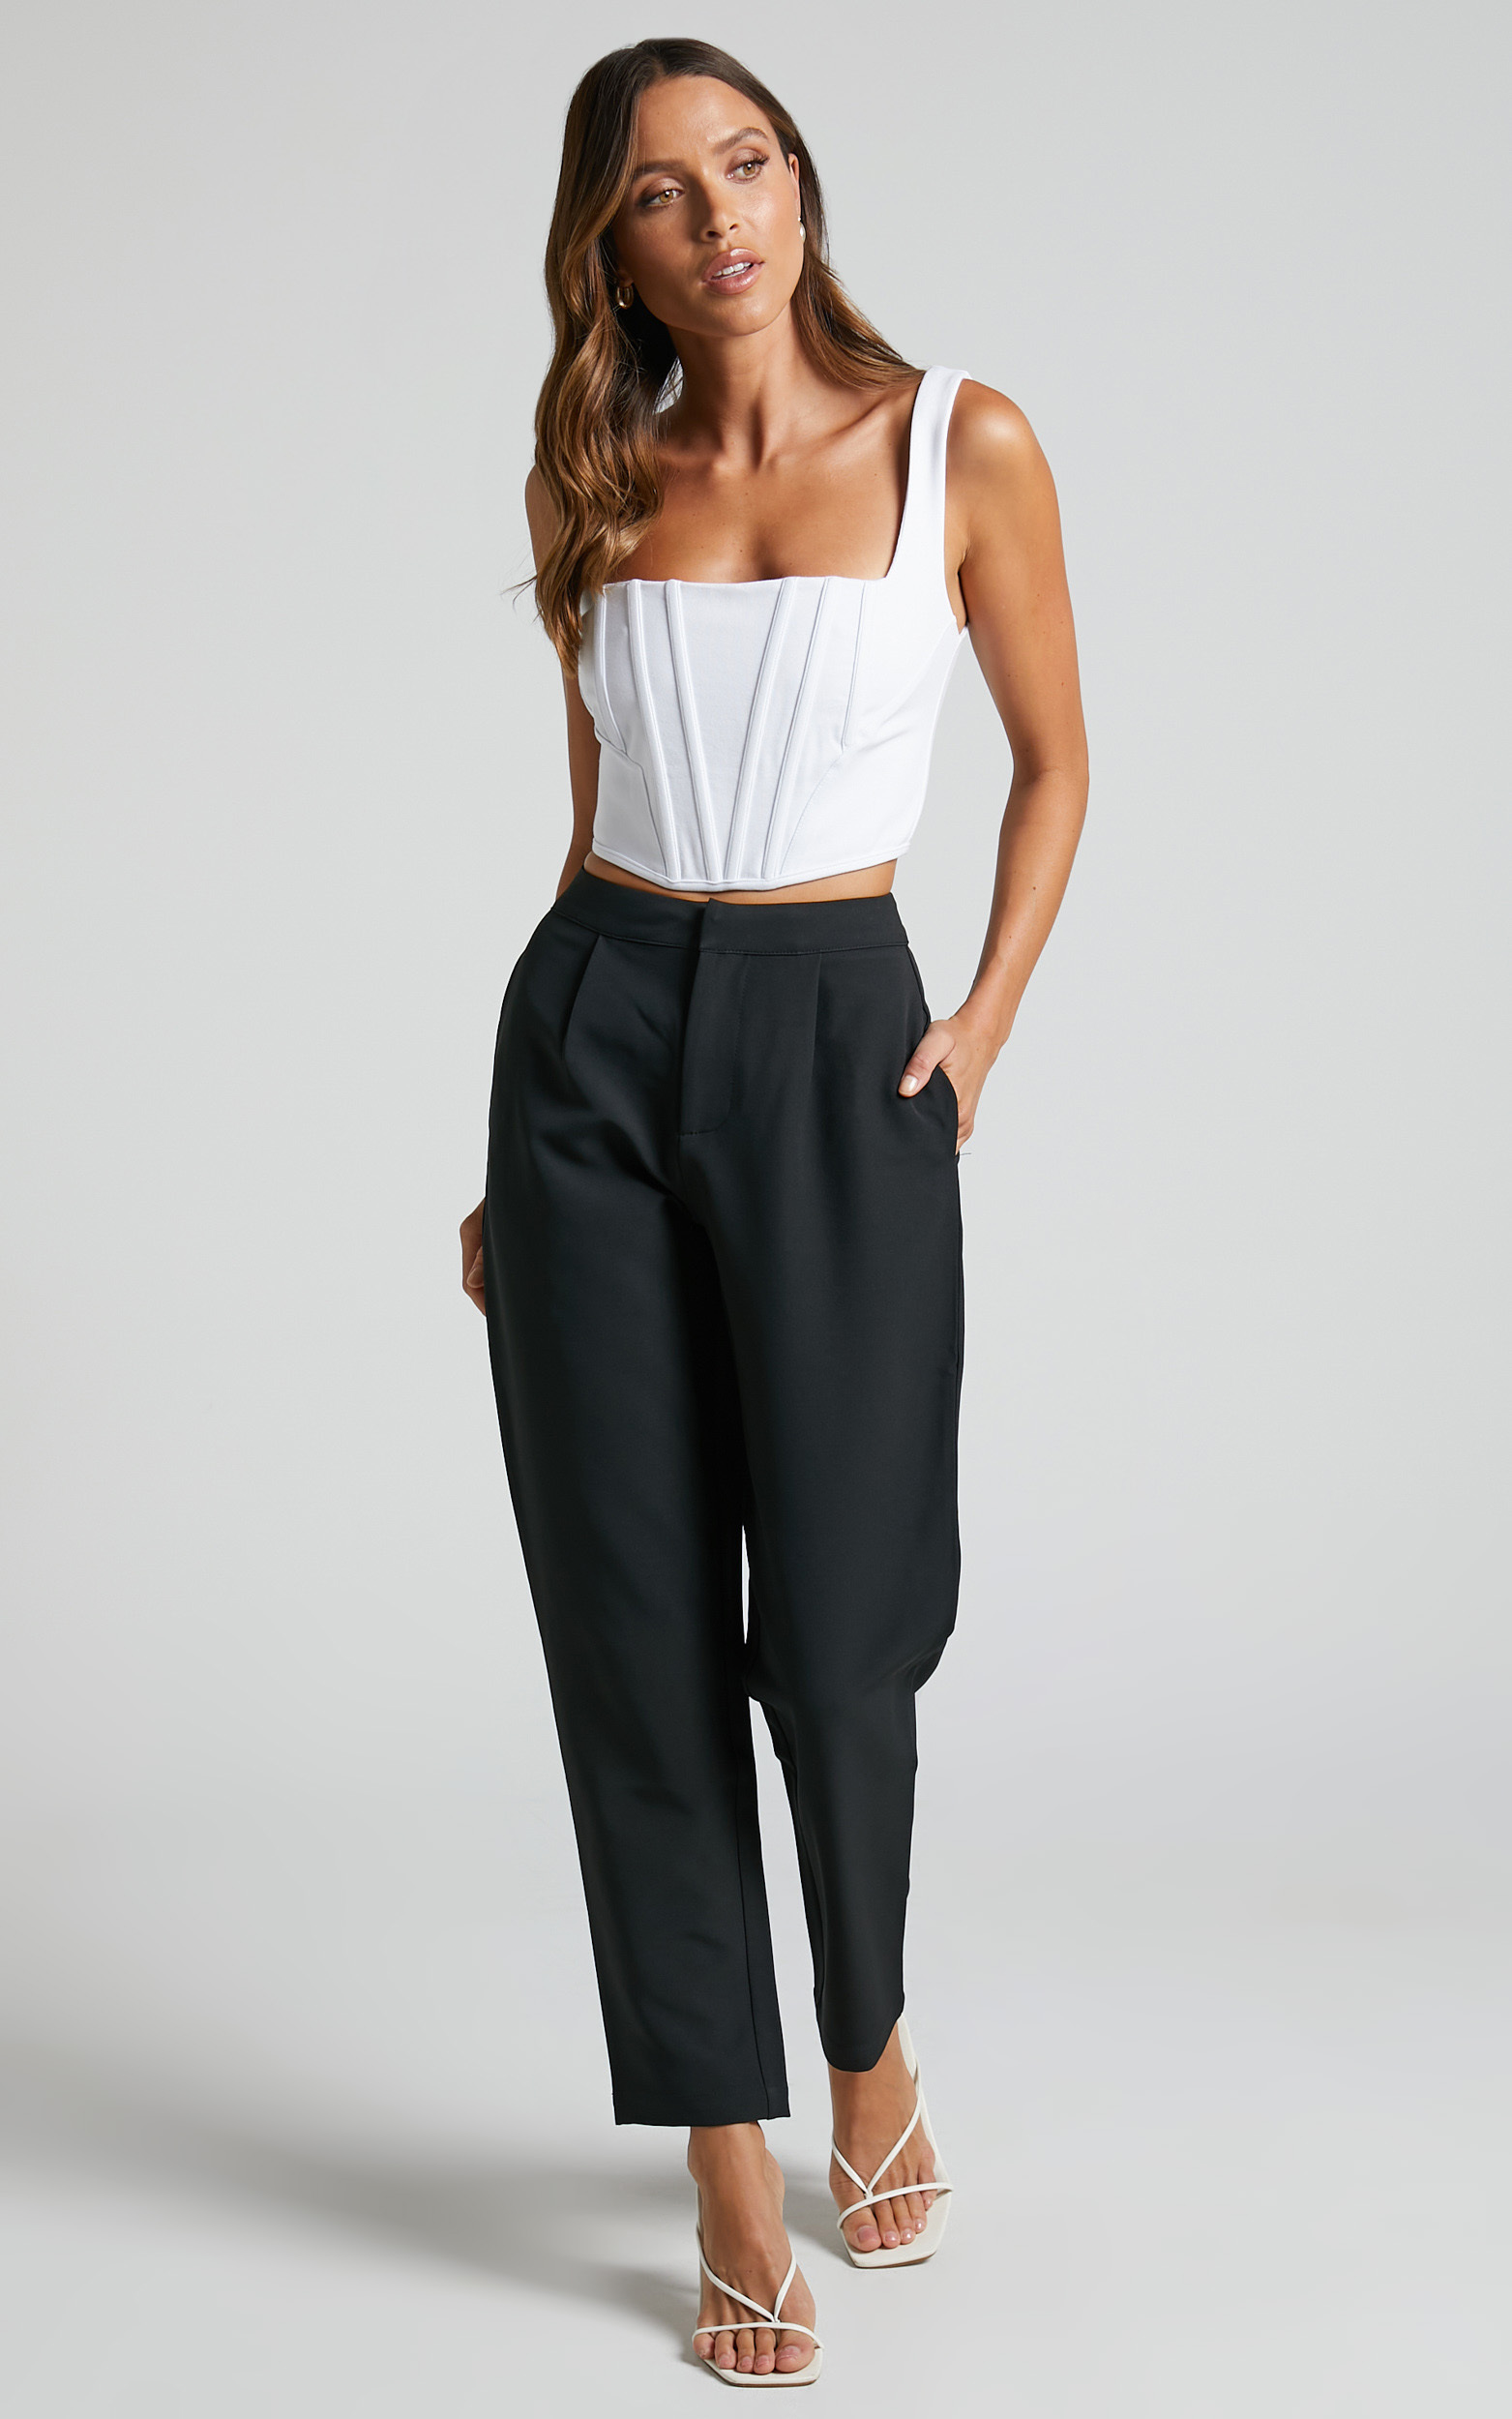 Damika Pants - High Waist Cropped Pin Tuck Pants in Black - 04, BLK1, hi-res image number null